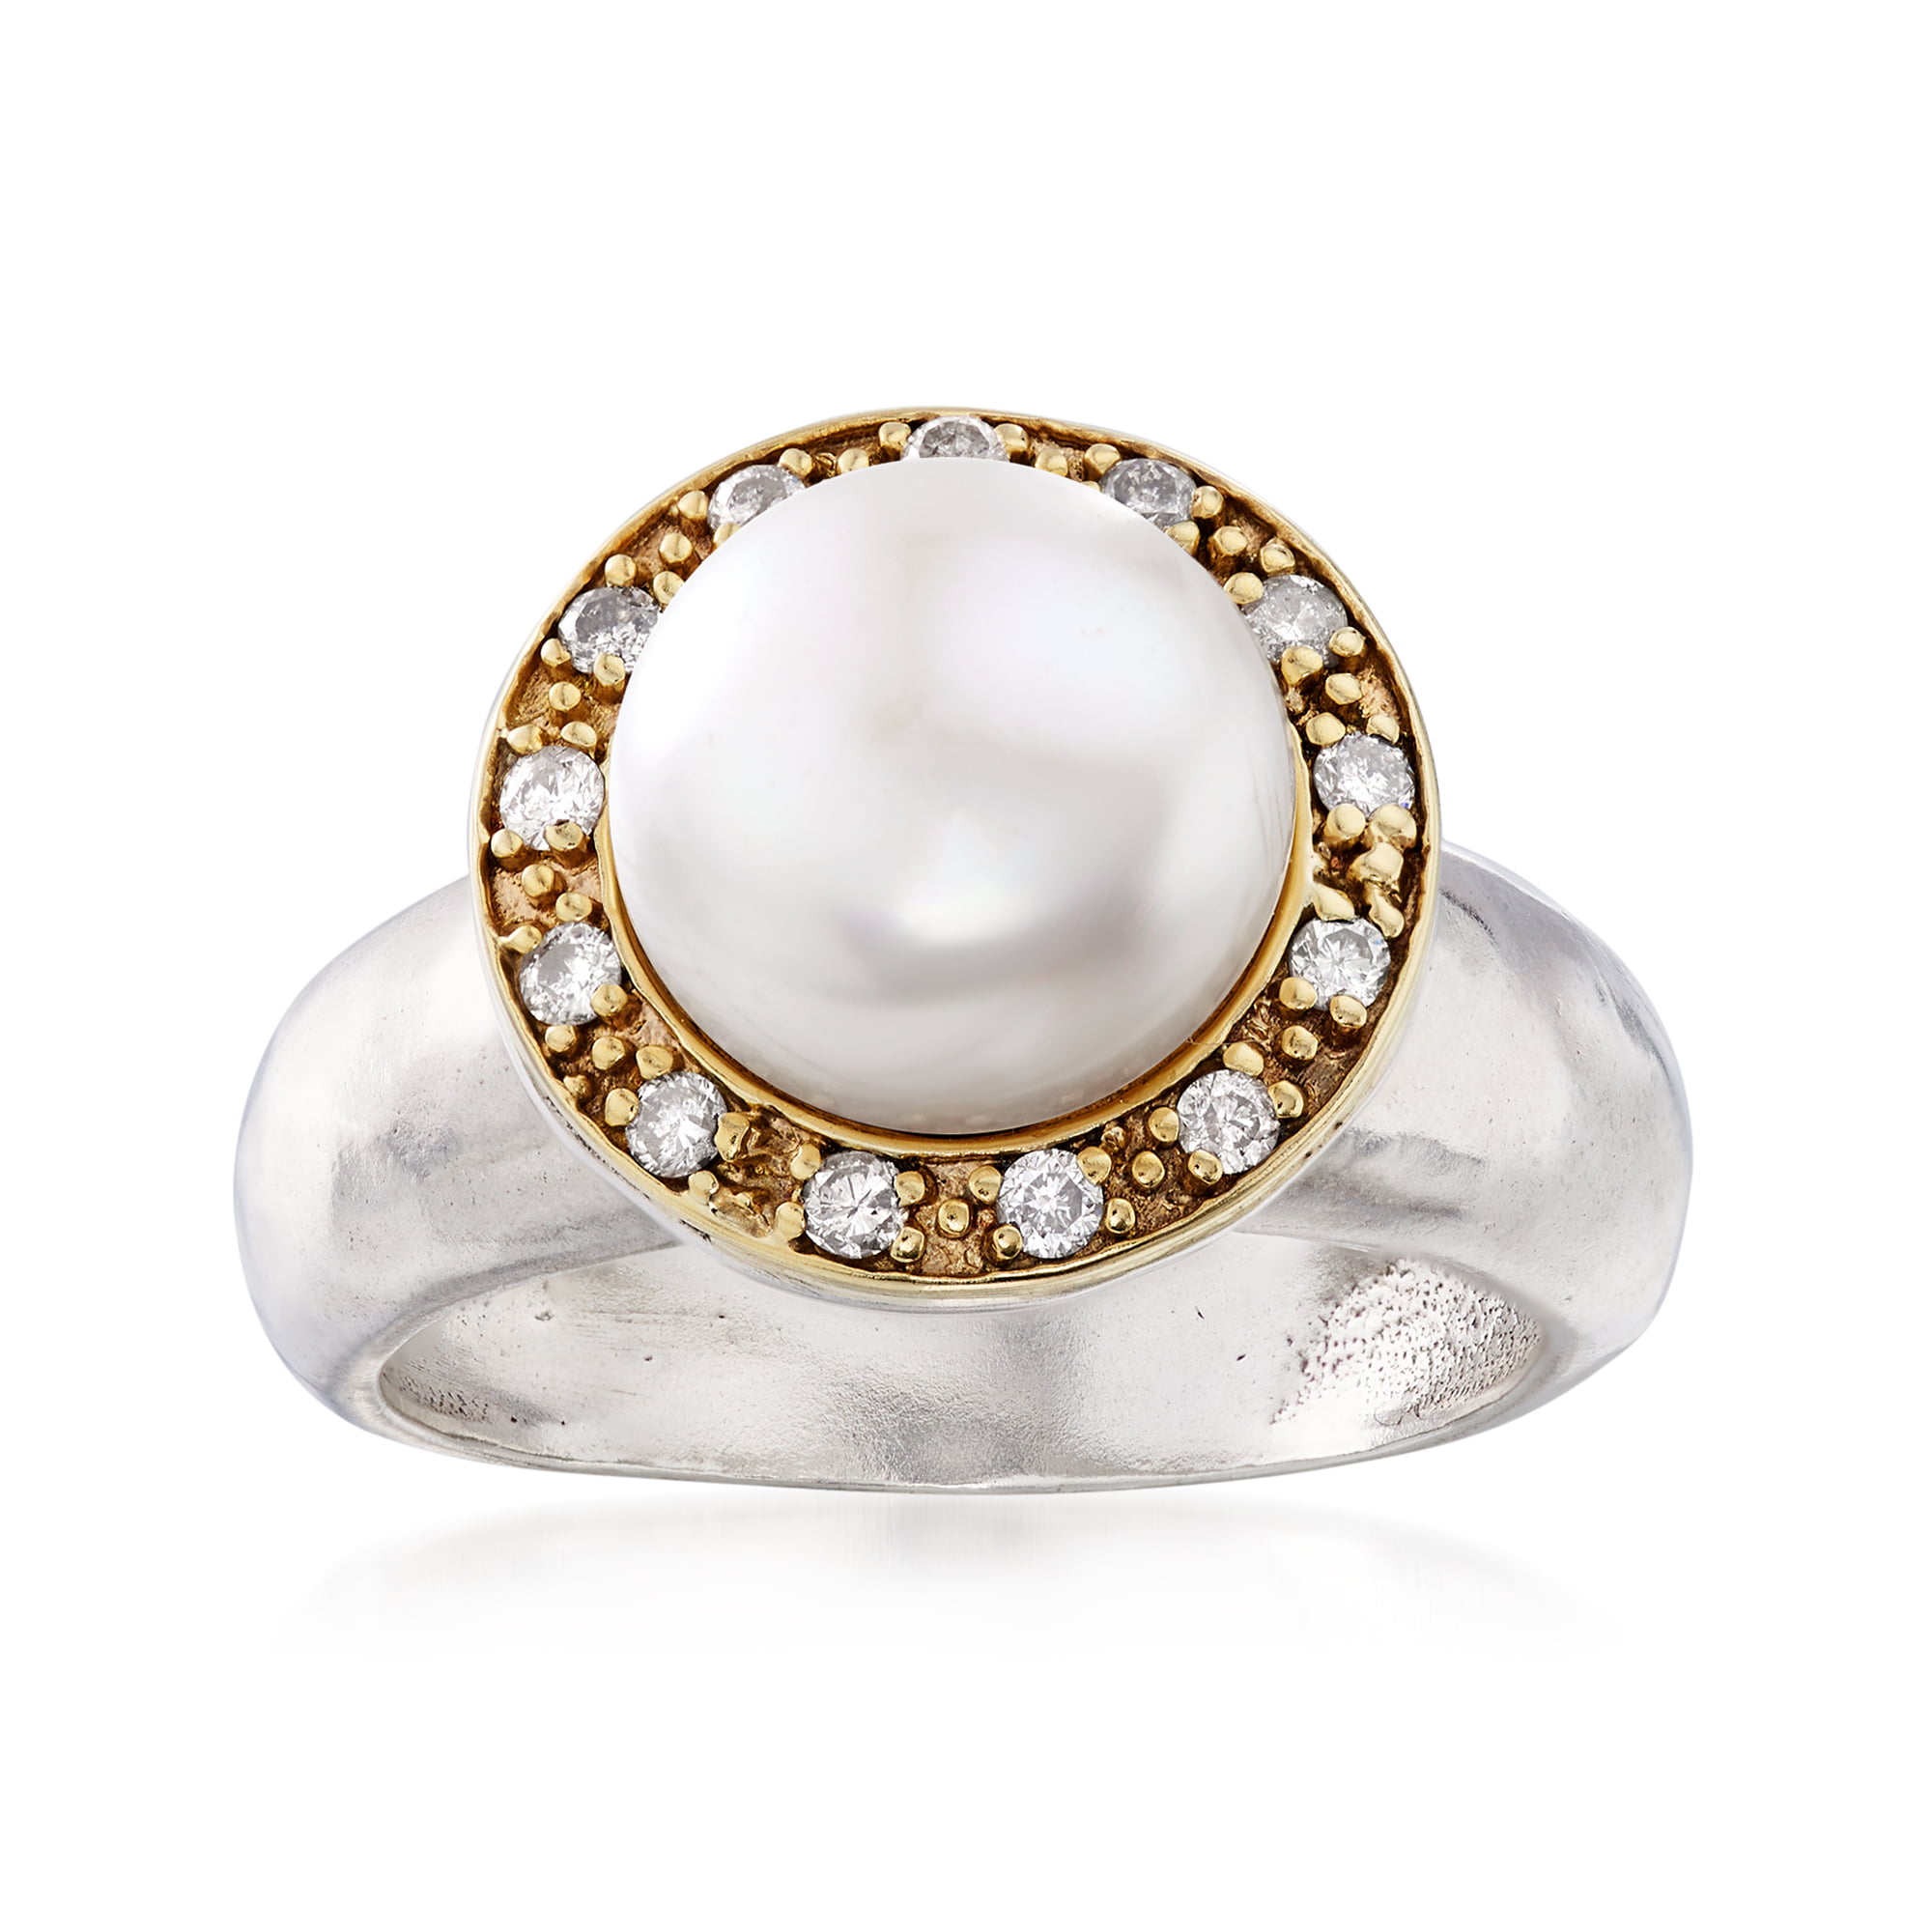 Ross-Simons - Ross-Simons 10mm Cultured Pearl and .20 ct. t.w. Diamond ...